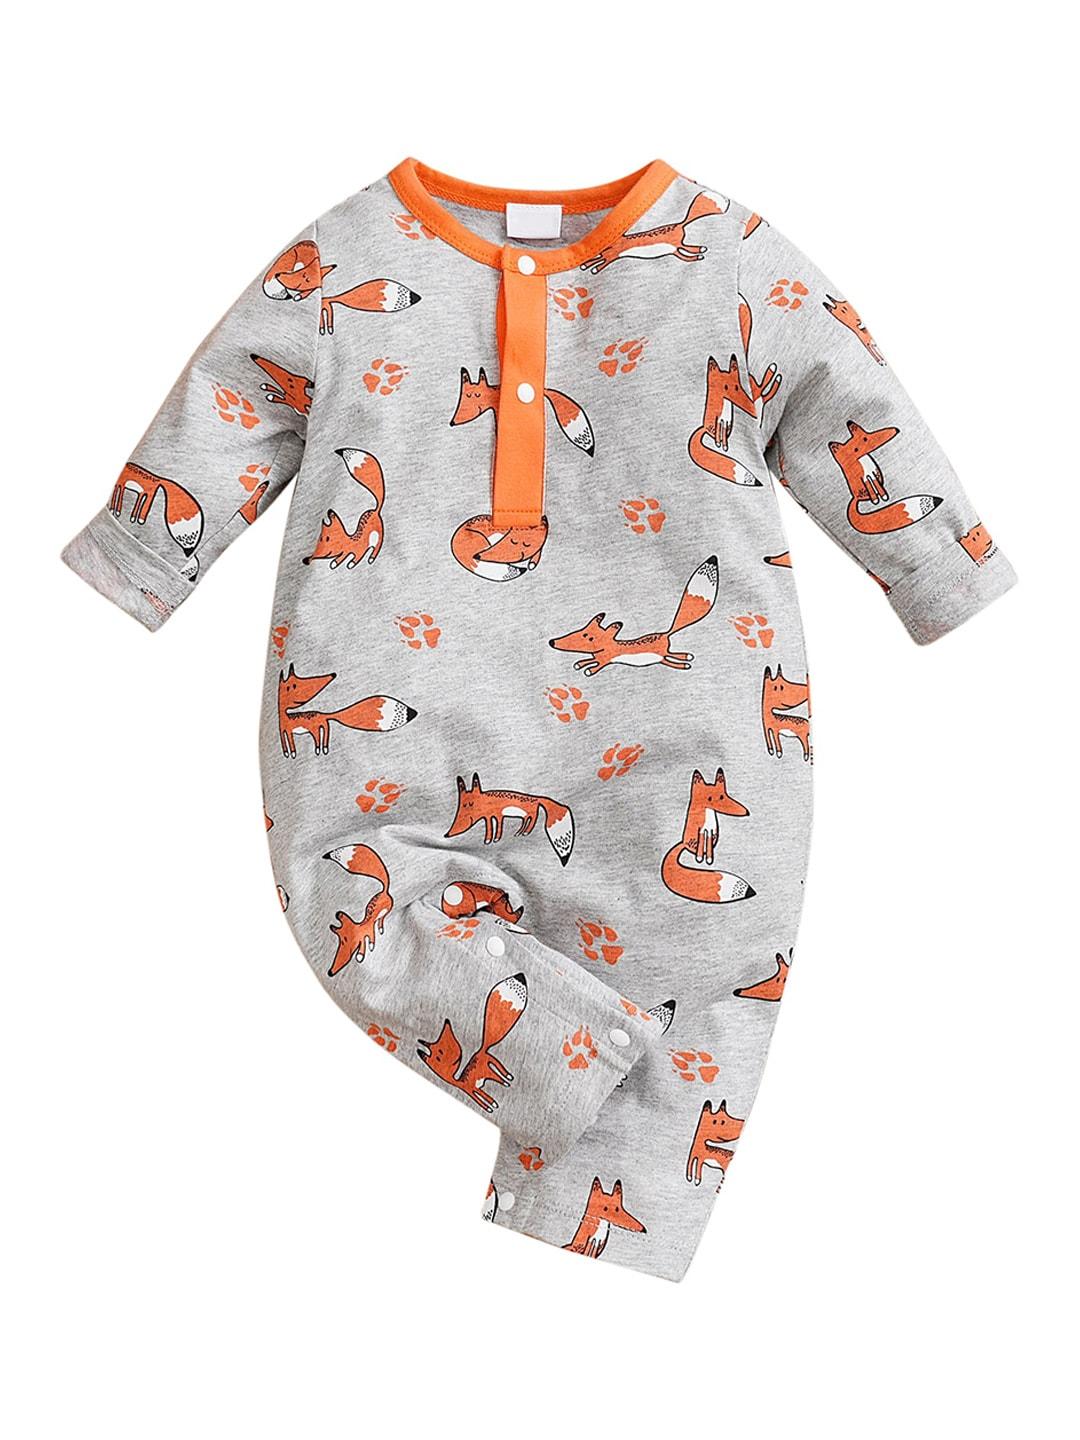 StyleCast Infants Printed Cotton Rompers